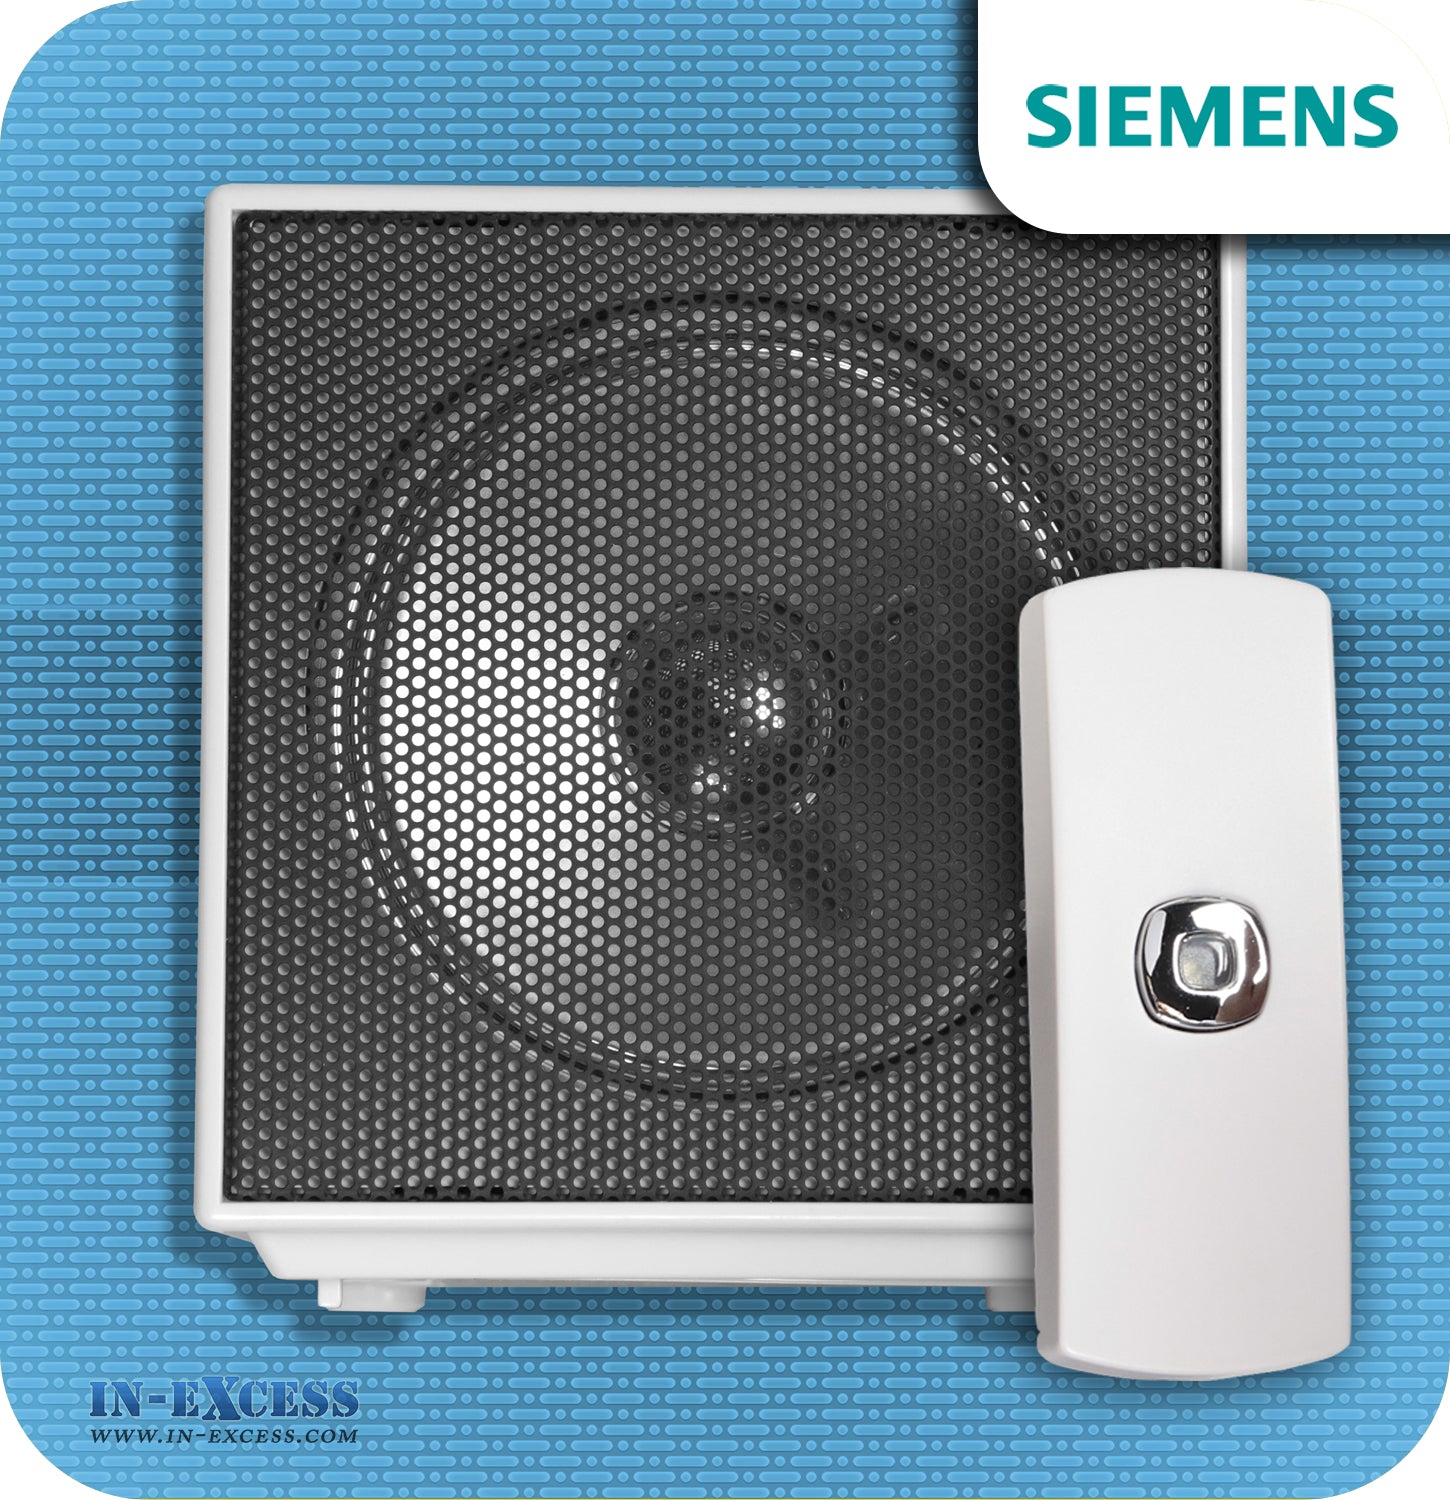 Siemens Cubist Wirefree Portable Door Bell Chime Kit JSJS-215- With JSJS-104W Bell Push